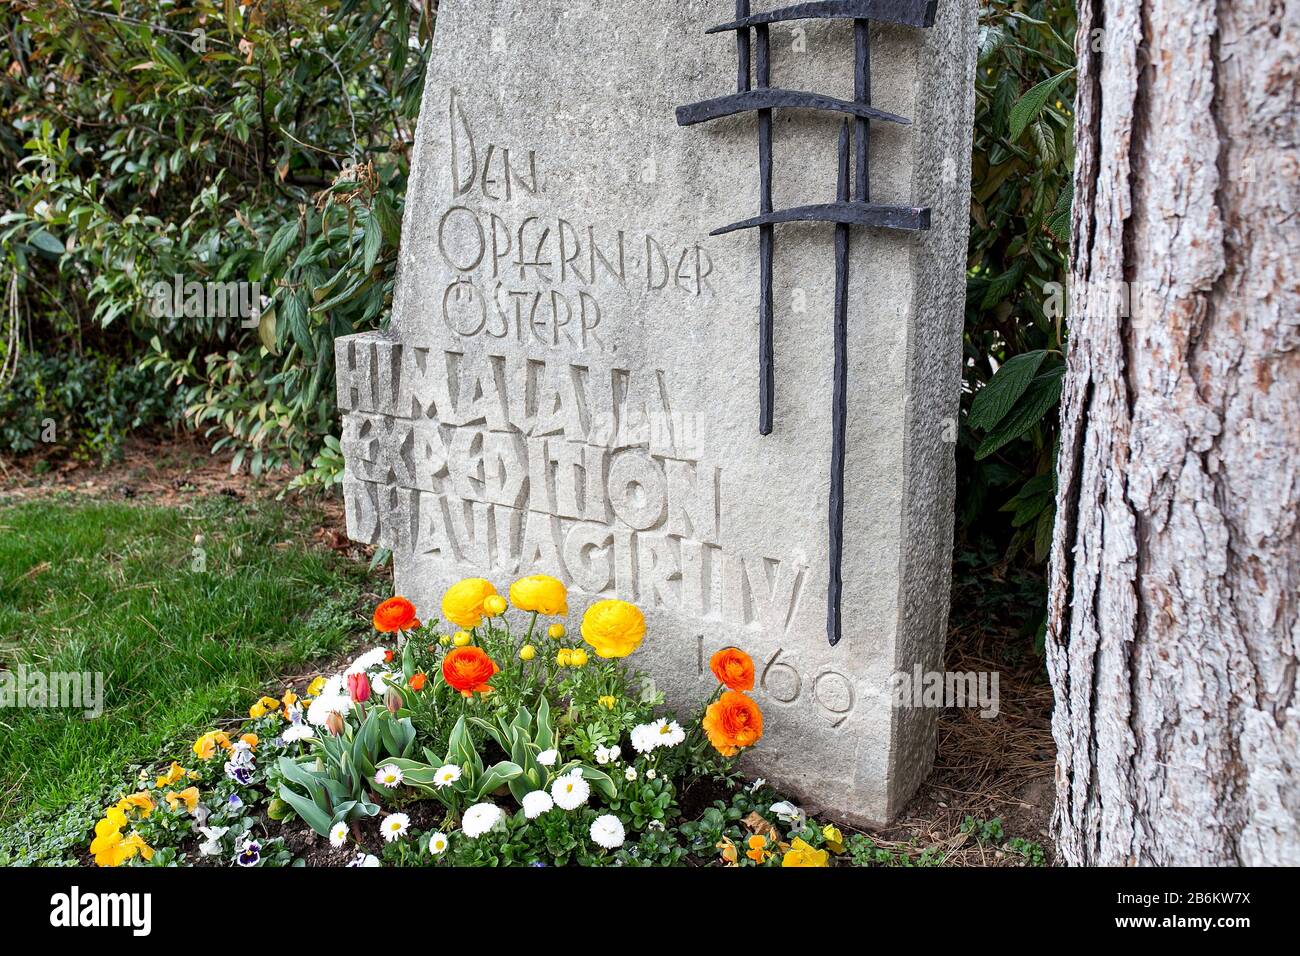 24 MARCH 2017, VIENNA, AUSTRIA: The unusual memorial tomb of dedicated to Dead alpinists in the Himalayan expedition Stock Photo